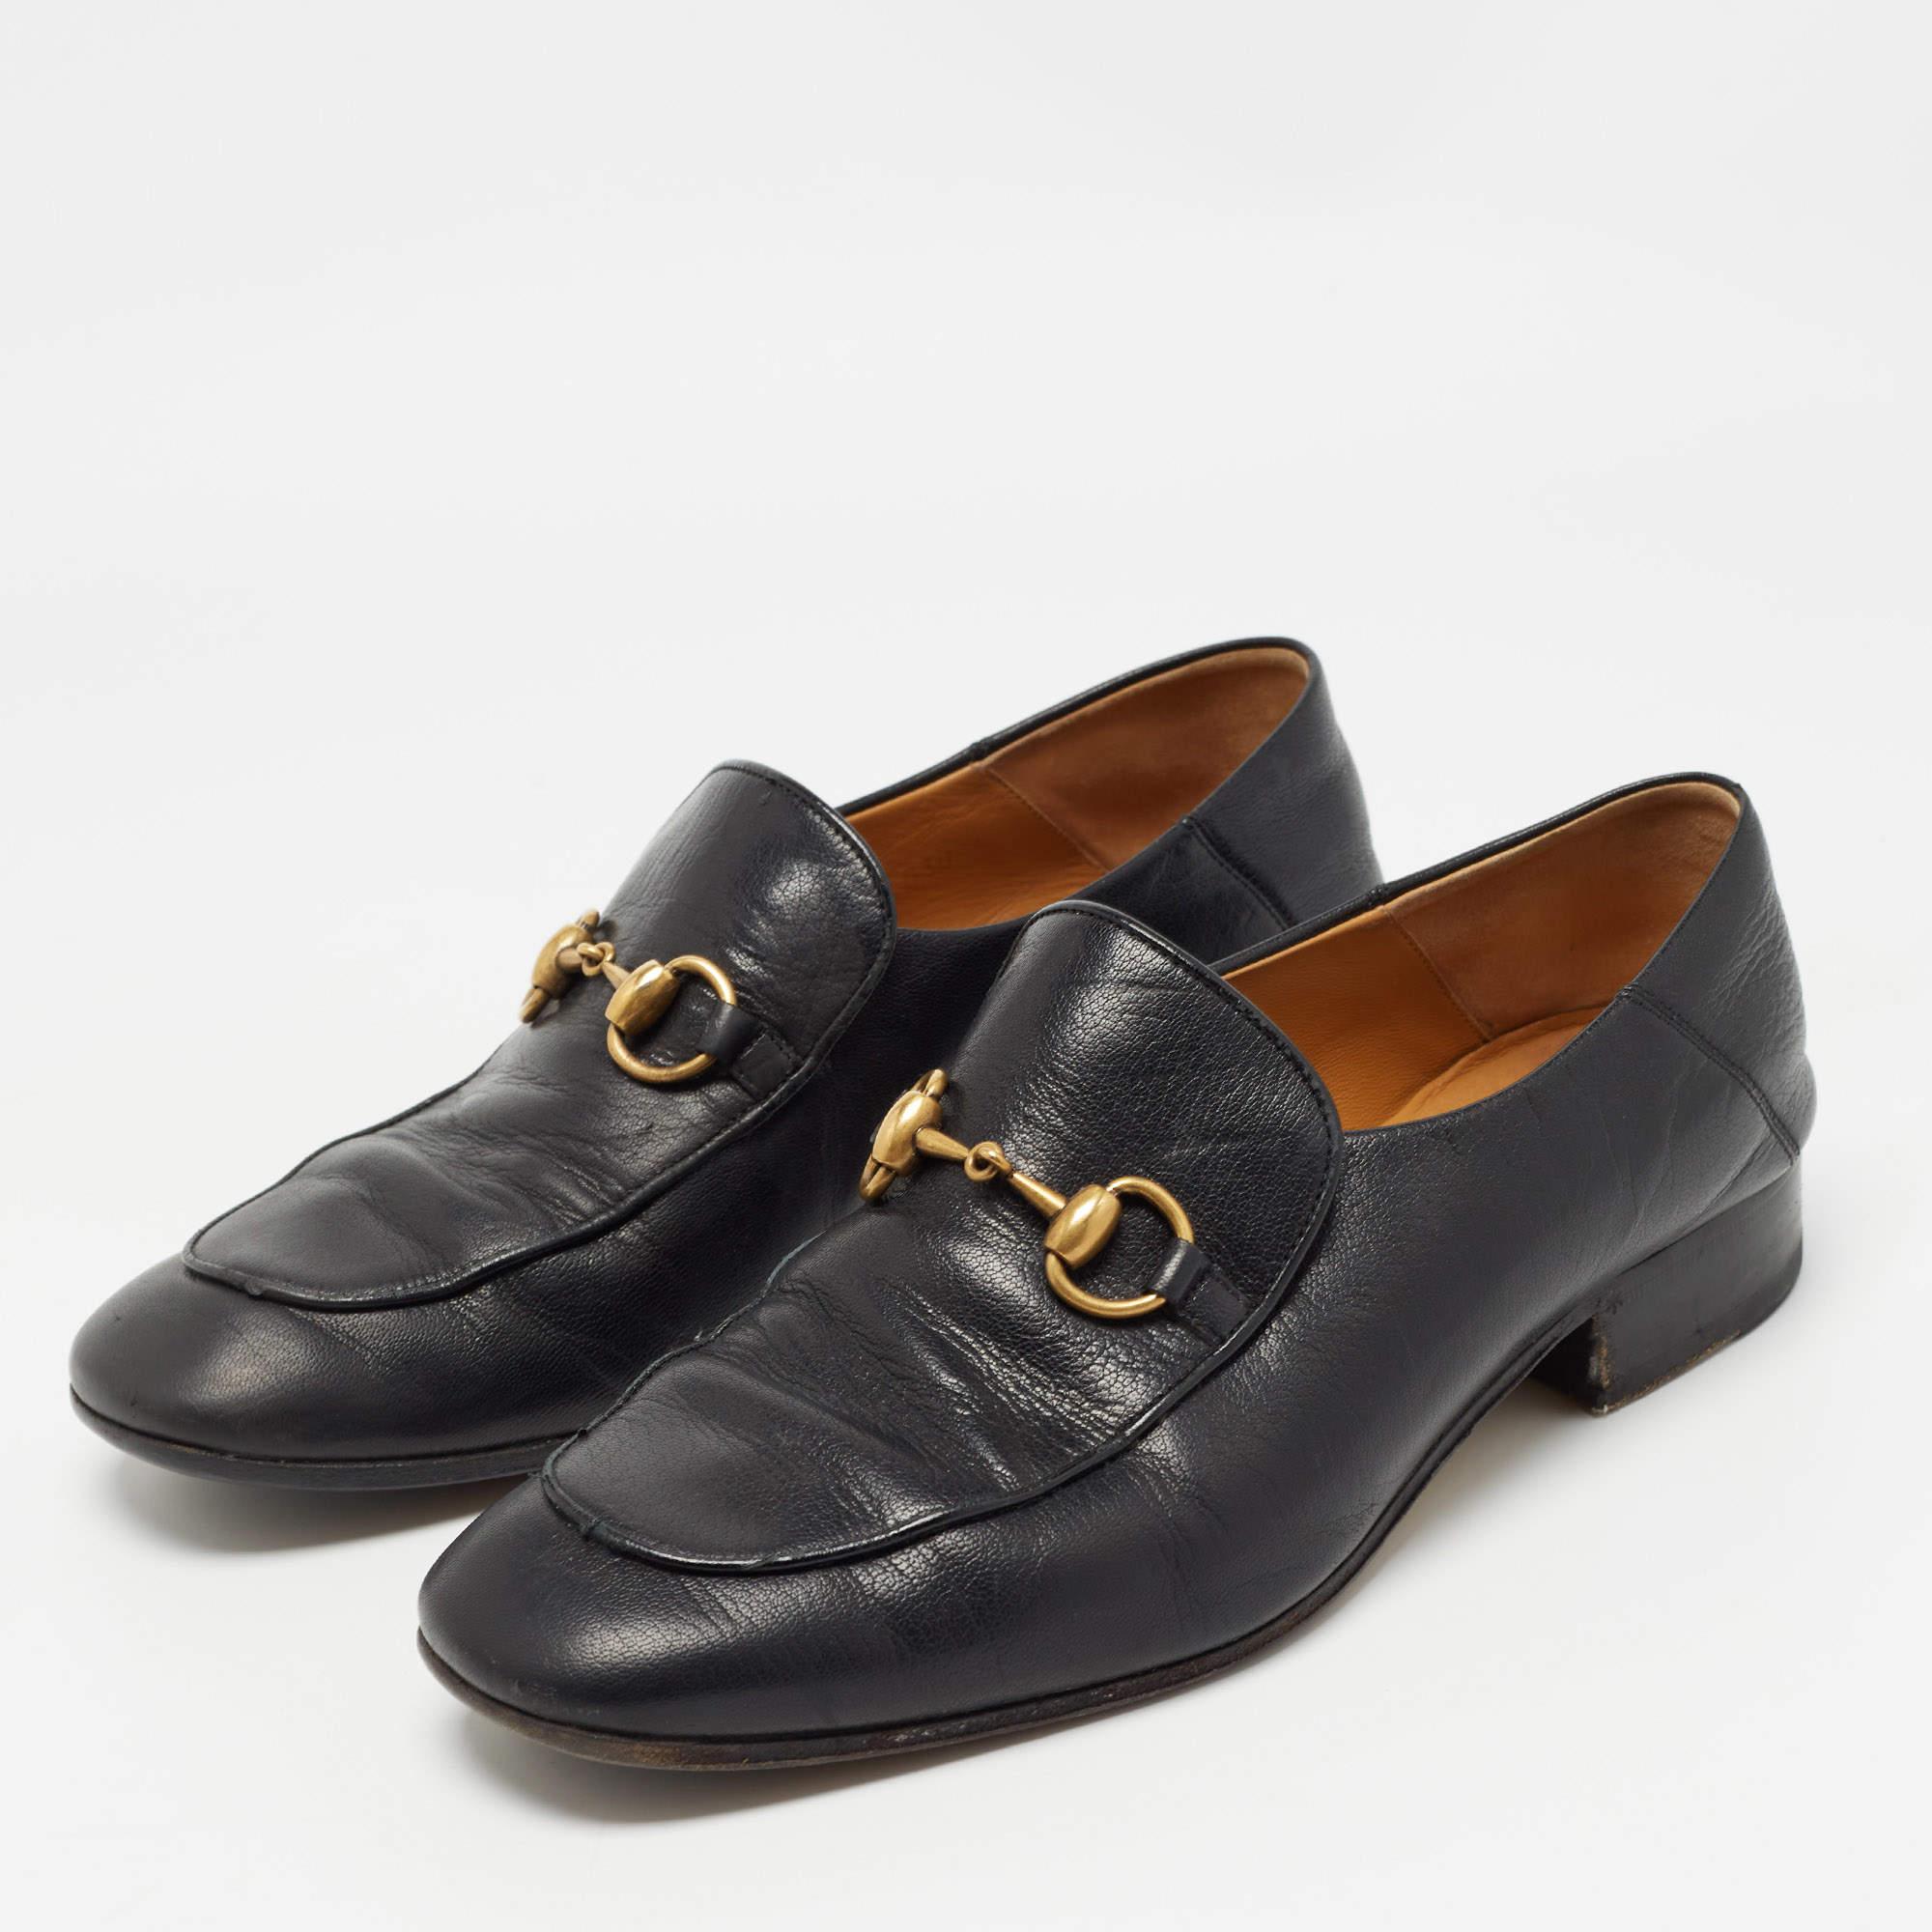 Gucci Black Leather Horsebit 1953 Loafers Size 40.5 For Sale 5